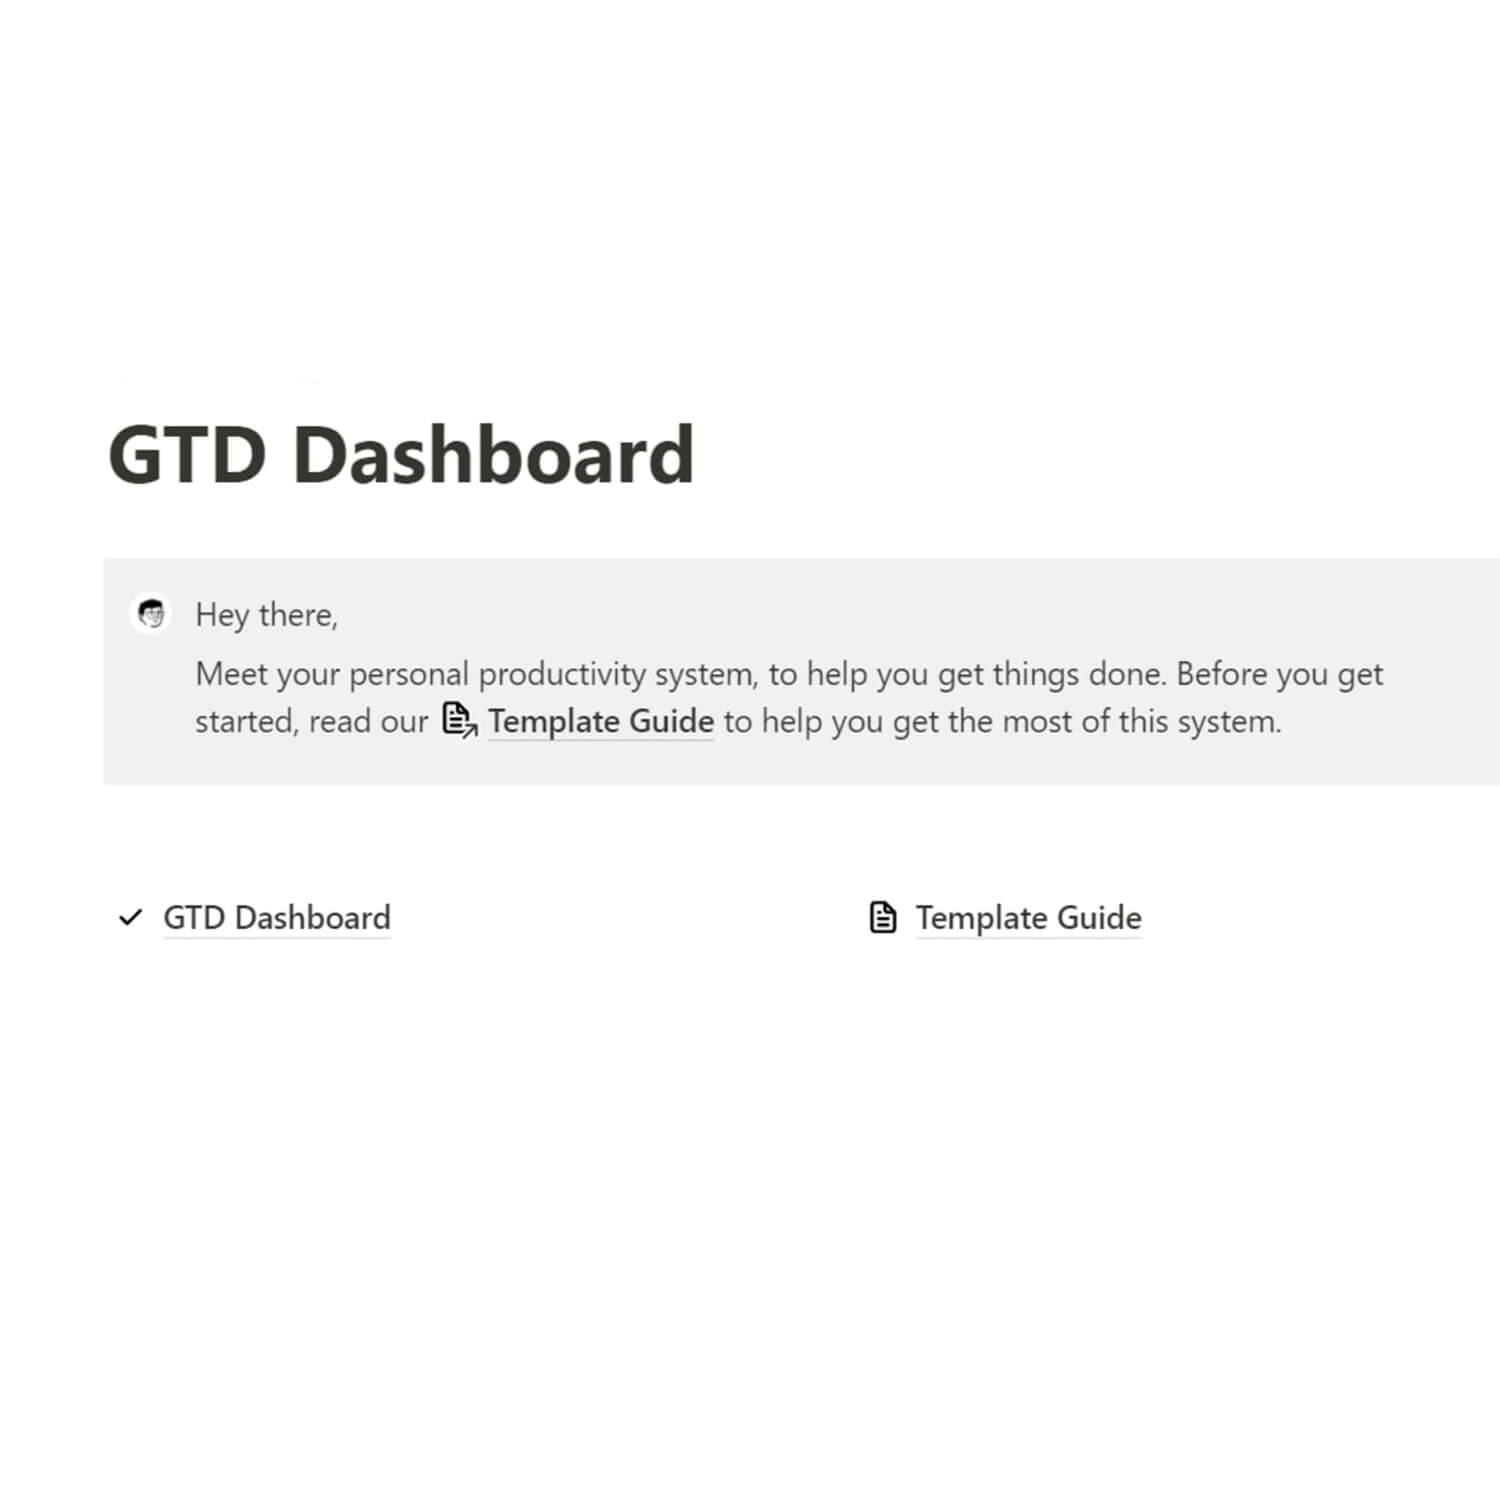 Inscription: GTD Dashboard, "Hey there, Meet your personal productivity system, to help you get things done".